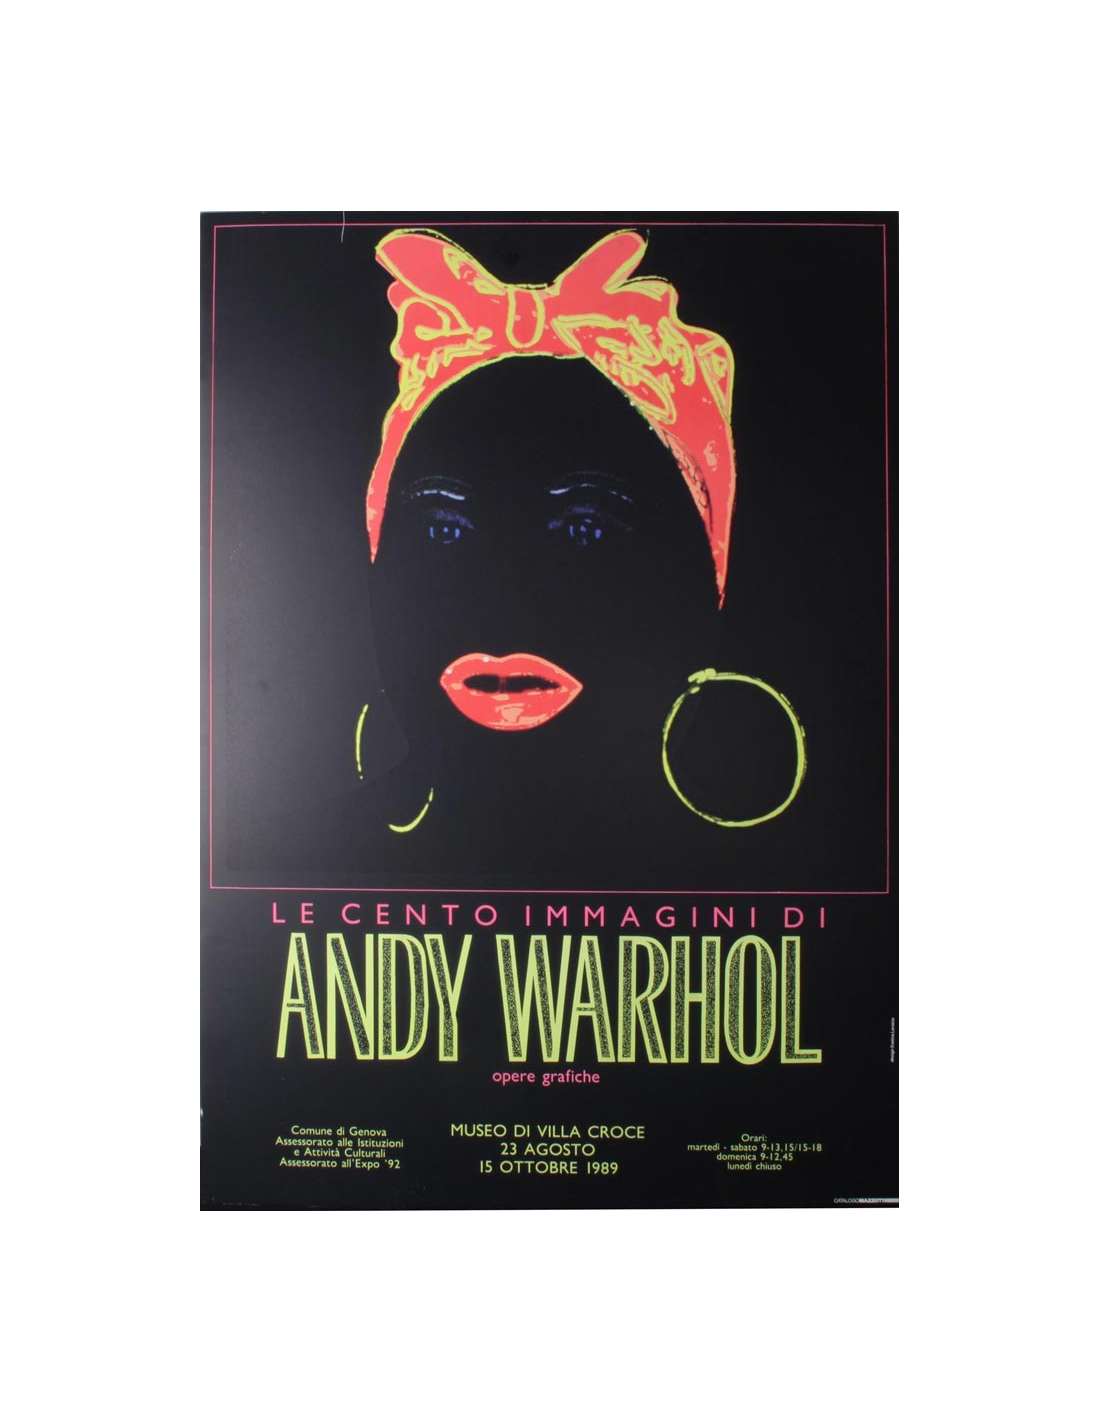 Le Cento Immagini di by Andy Warhol 1989 on linen Genoa Exposition